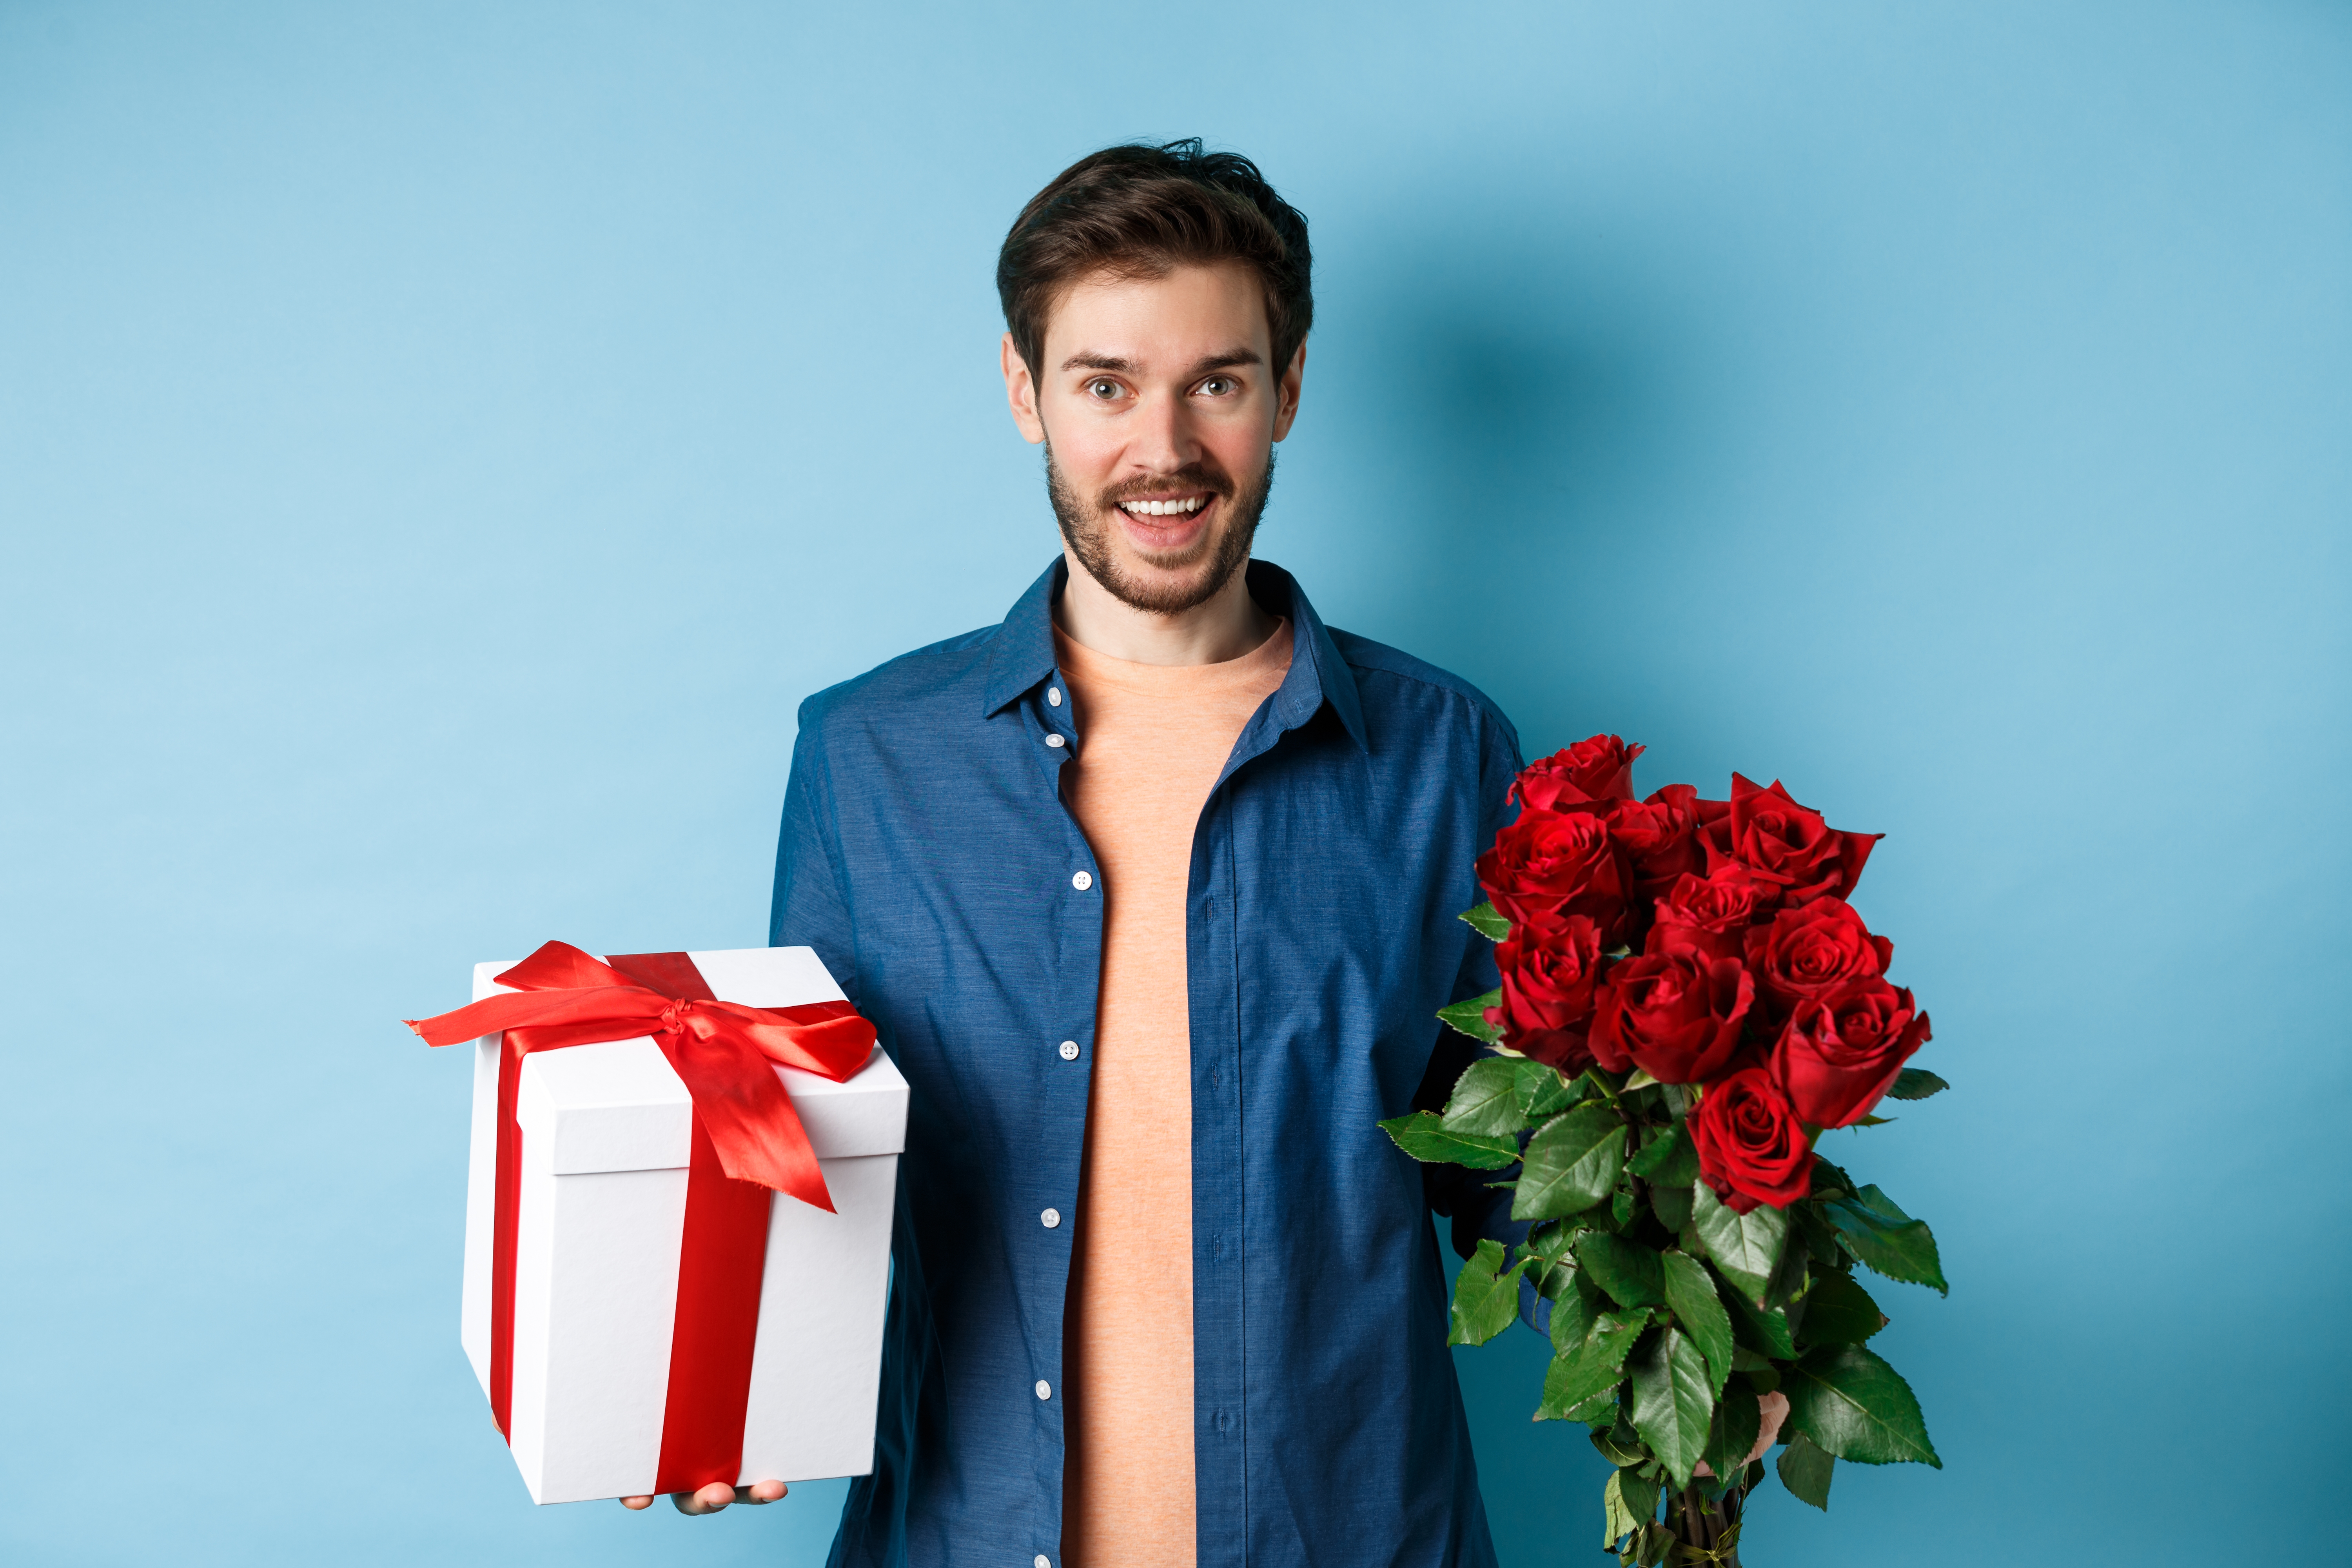 Man holding a bouquet of roses and a gift box | Source: Shutterstock